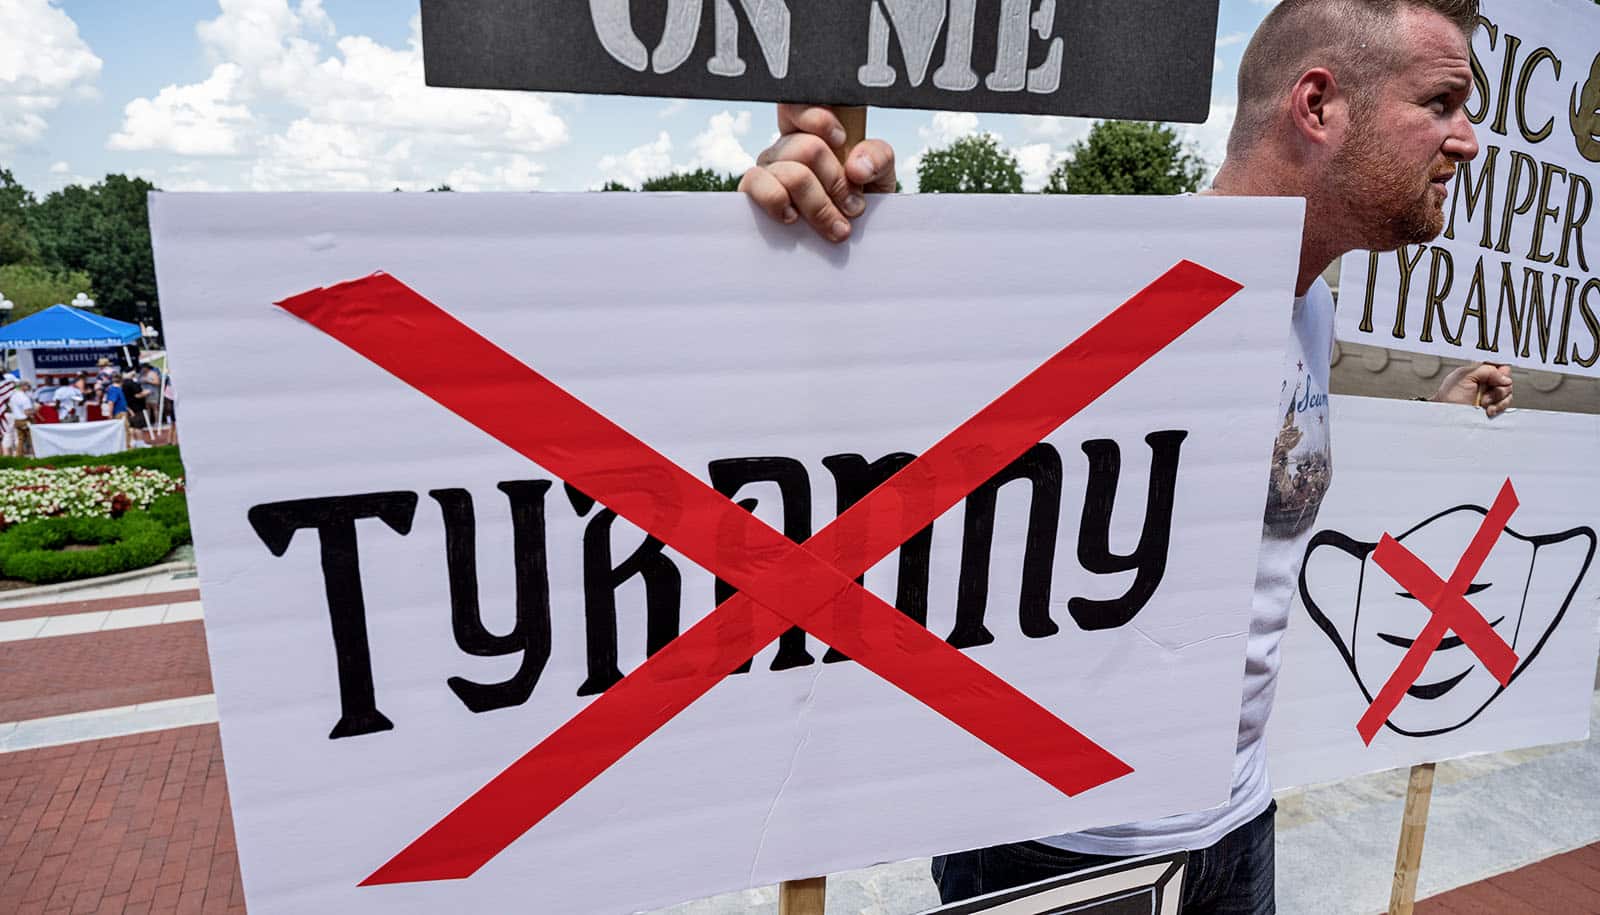 man holds mask and "tyranny" signs with red tape Xs